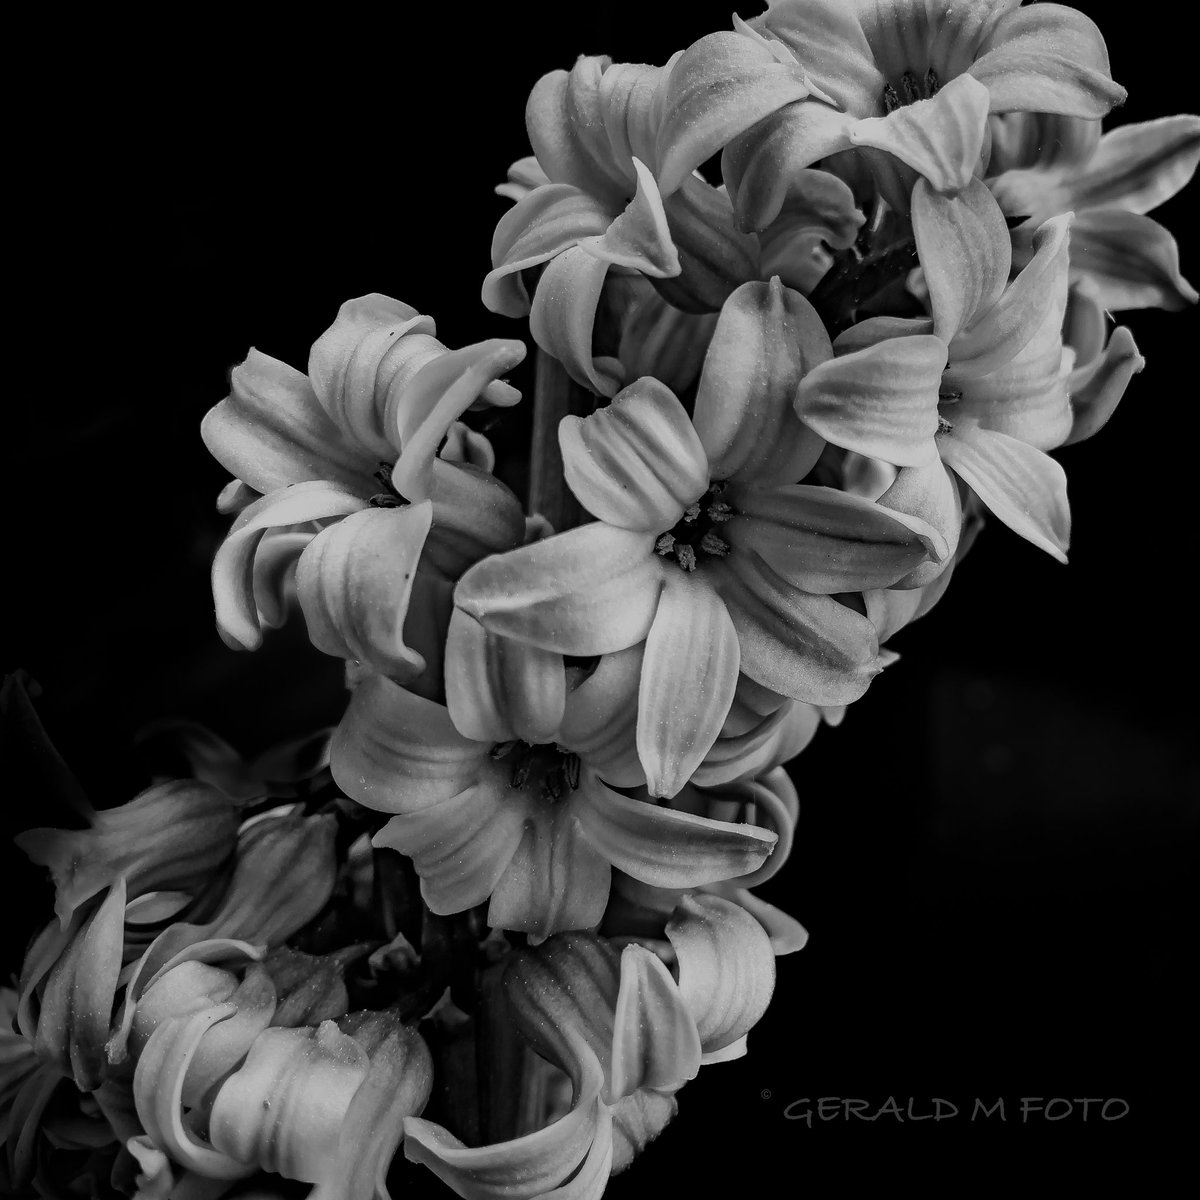 [ Hyacinthus ] Seems I‘m getting used to shoot in ProRaw format and matching editing via LR #bnw_macro #macrophotography #blackandwhitephotography #ThePhotoHour #BlackAndWhiteMacro #flowerphotography